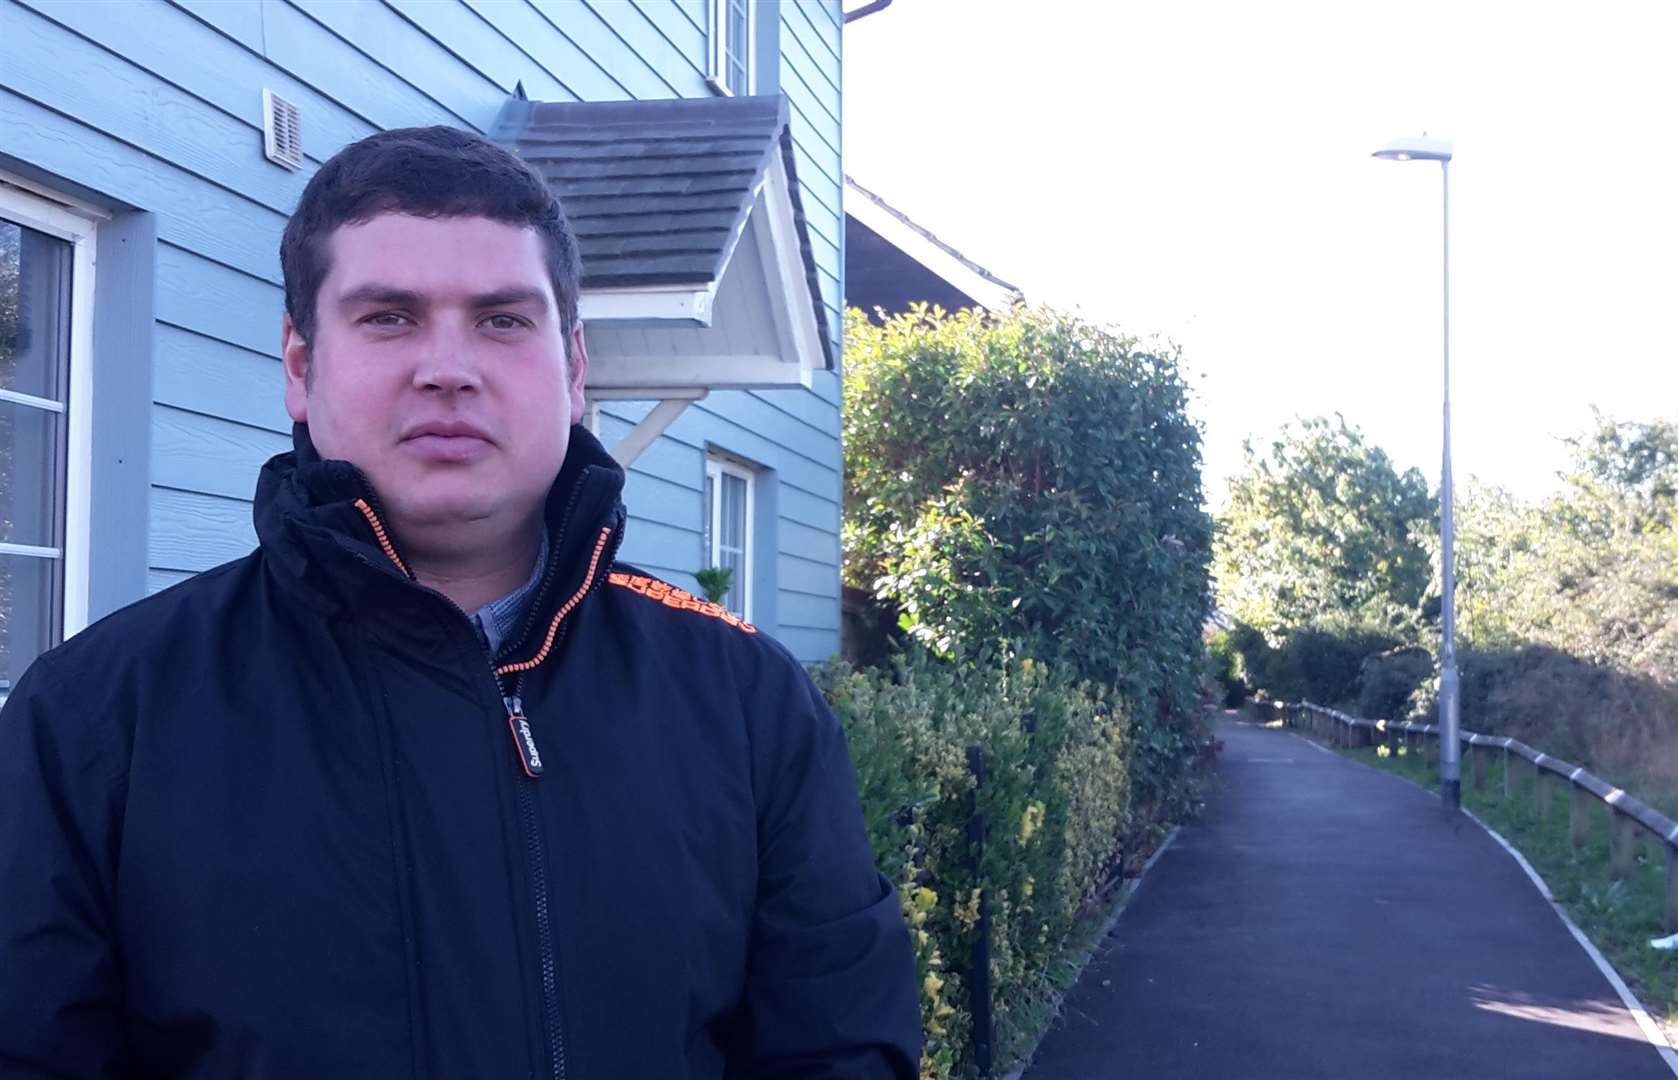 Elliott Jayes said the street lamp where he lives in Thistle Walk, Minster, has not been working for more than a year